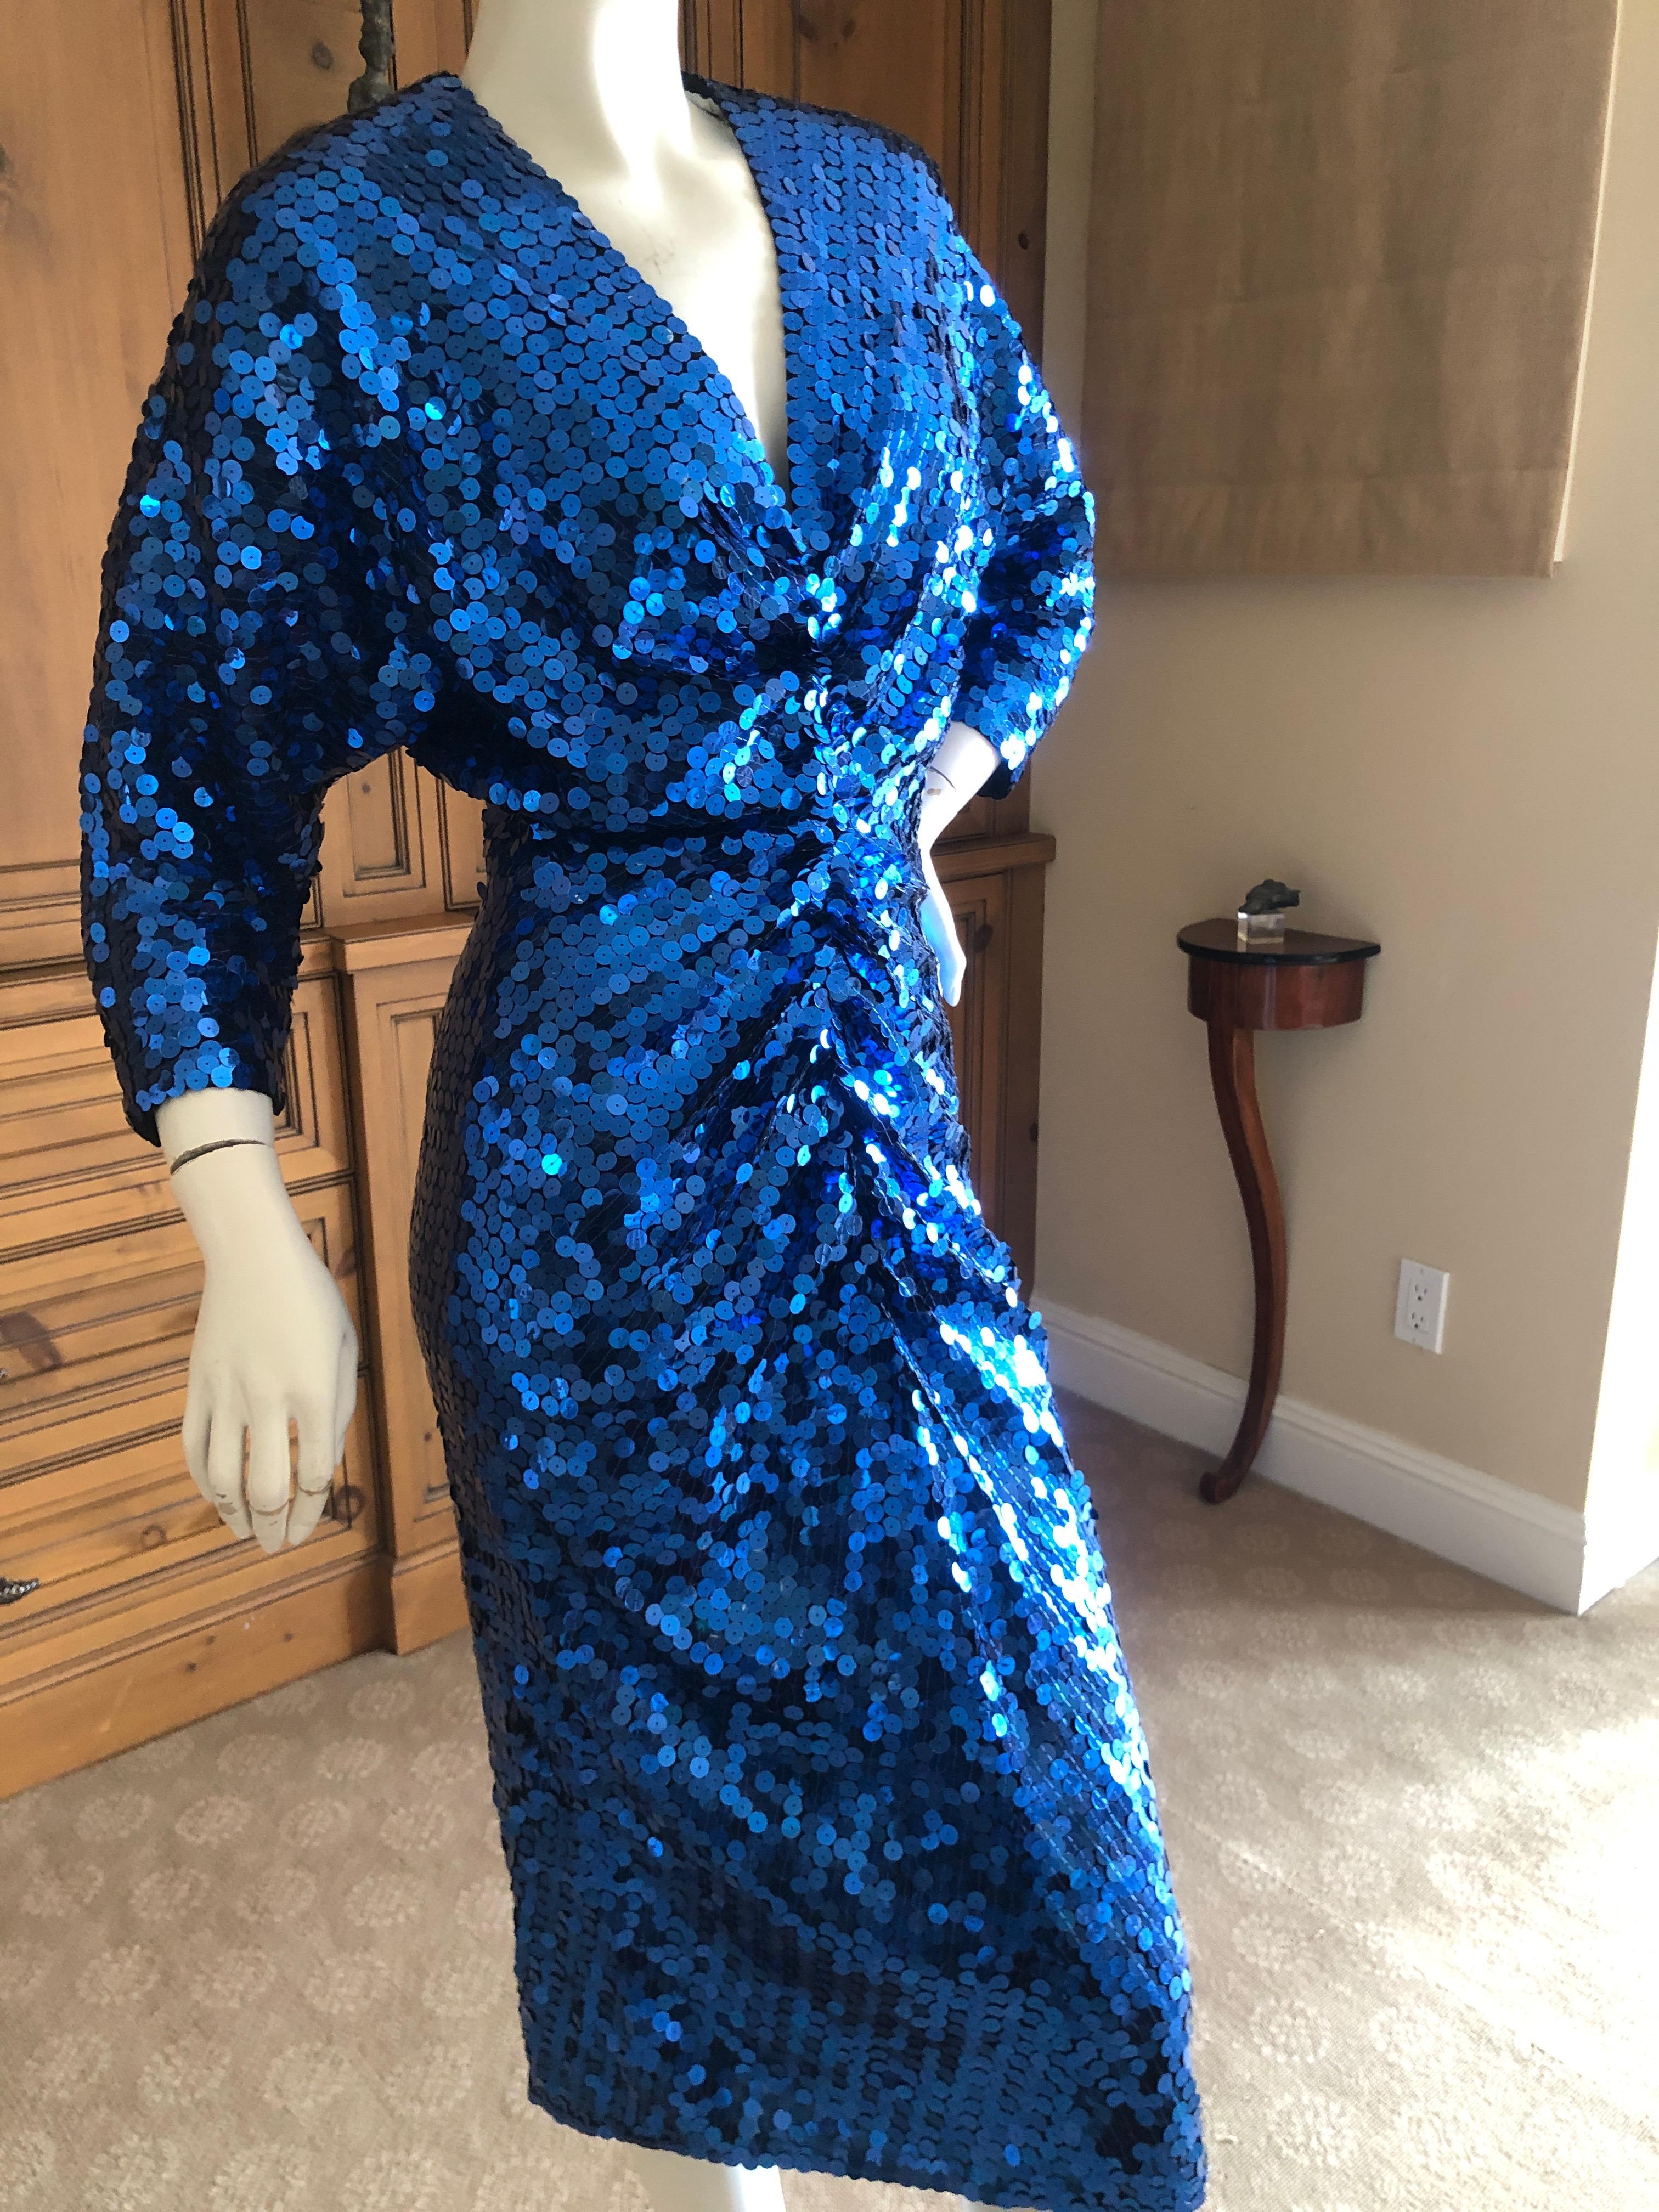 Blue Oleg Cassini 1970's Sequin Disco Era Dress Sz 8 Deadstock New with Tags For Sale